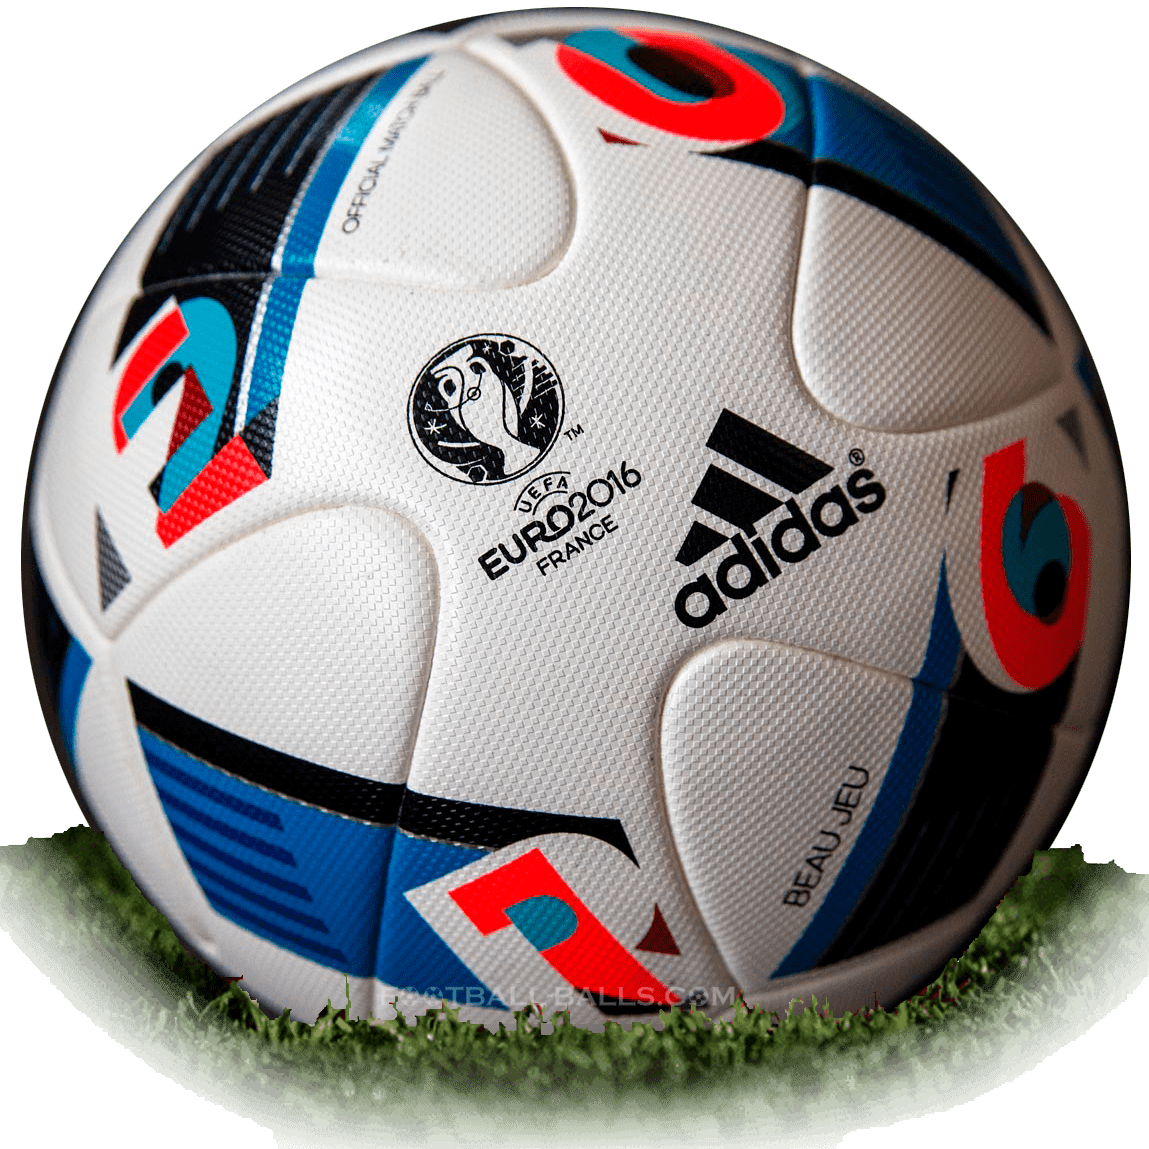 official match ball of Euro Cup 2016 